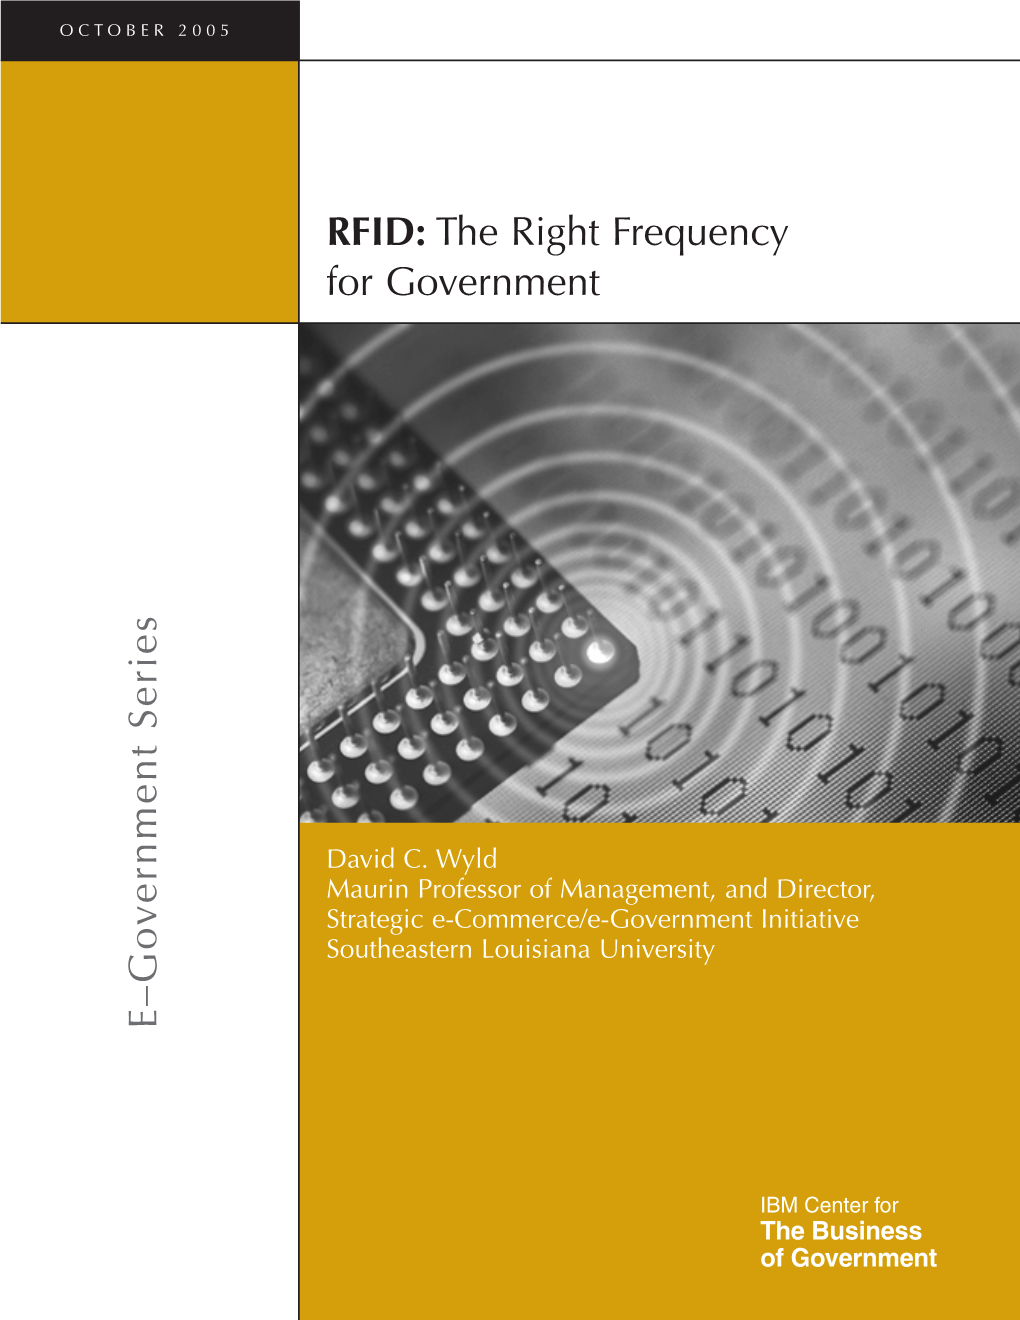 RFID: the Right Frequency for Government